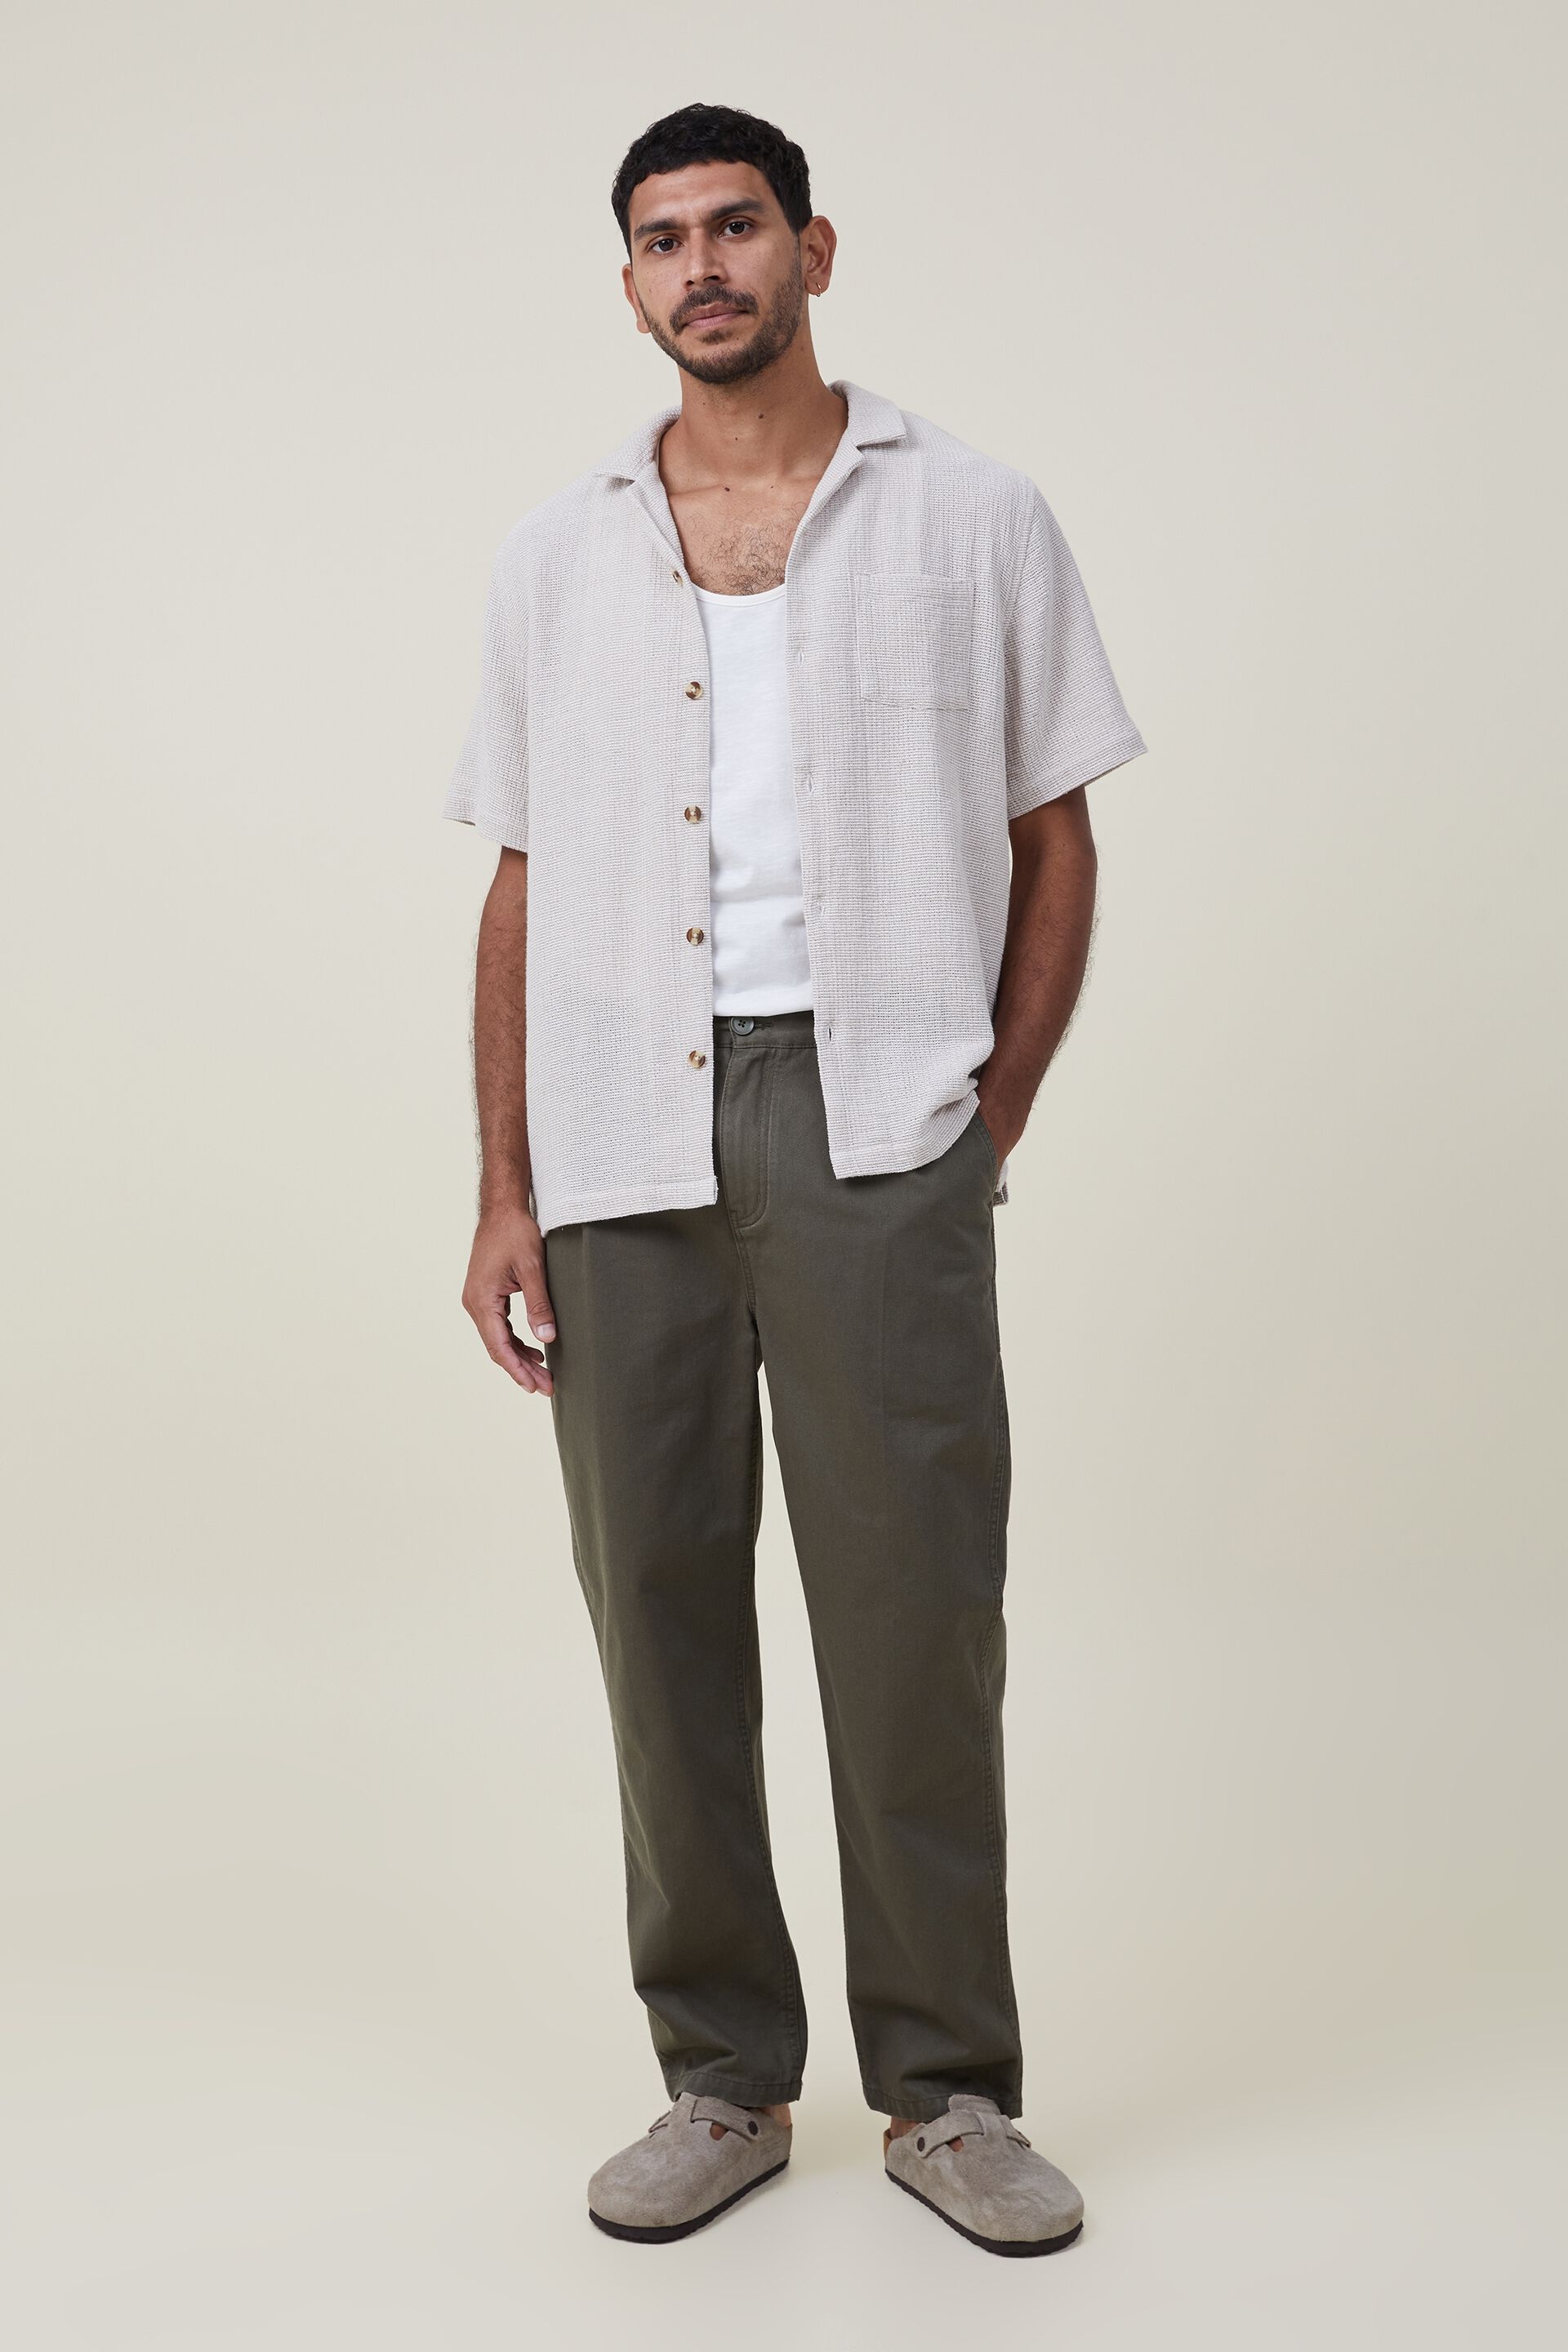 Men's Casual Trousers Sale, Men's Trousers Online India | Red Chief